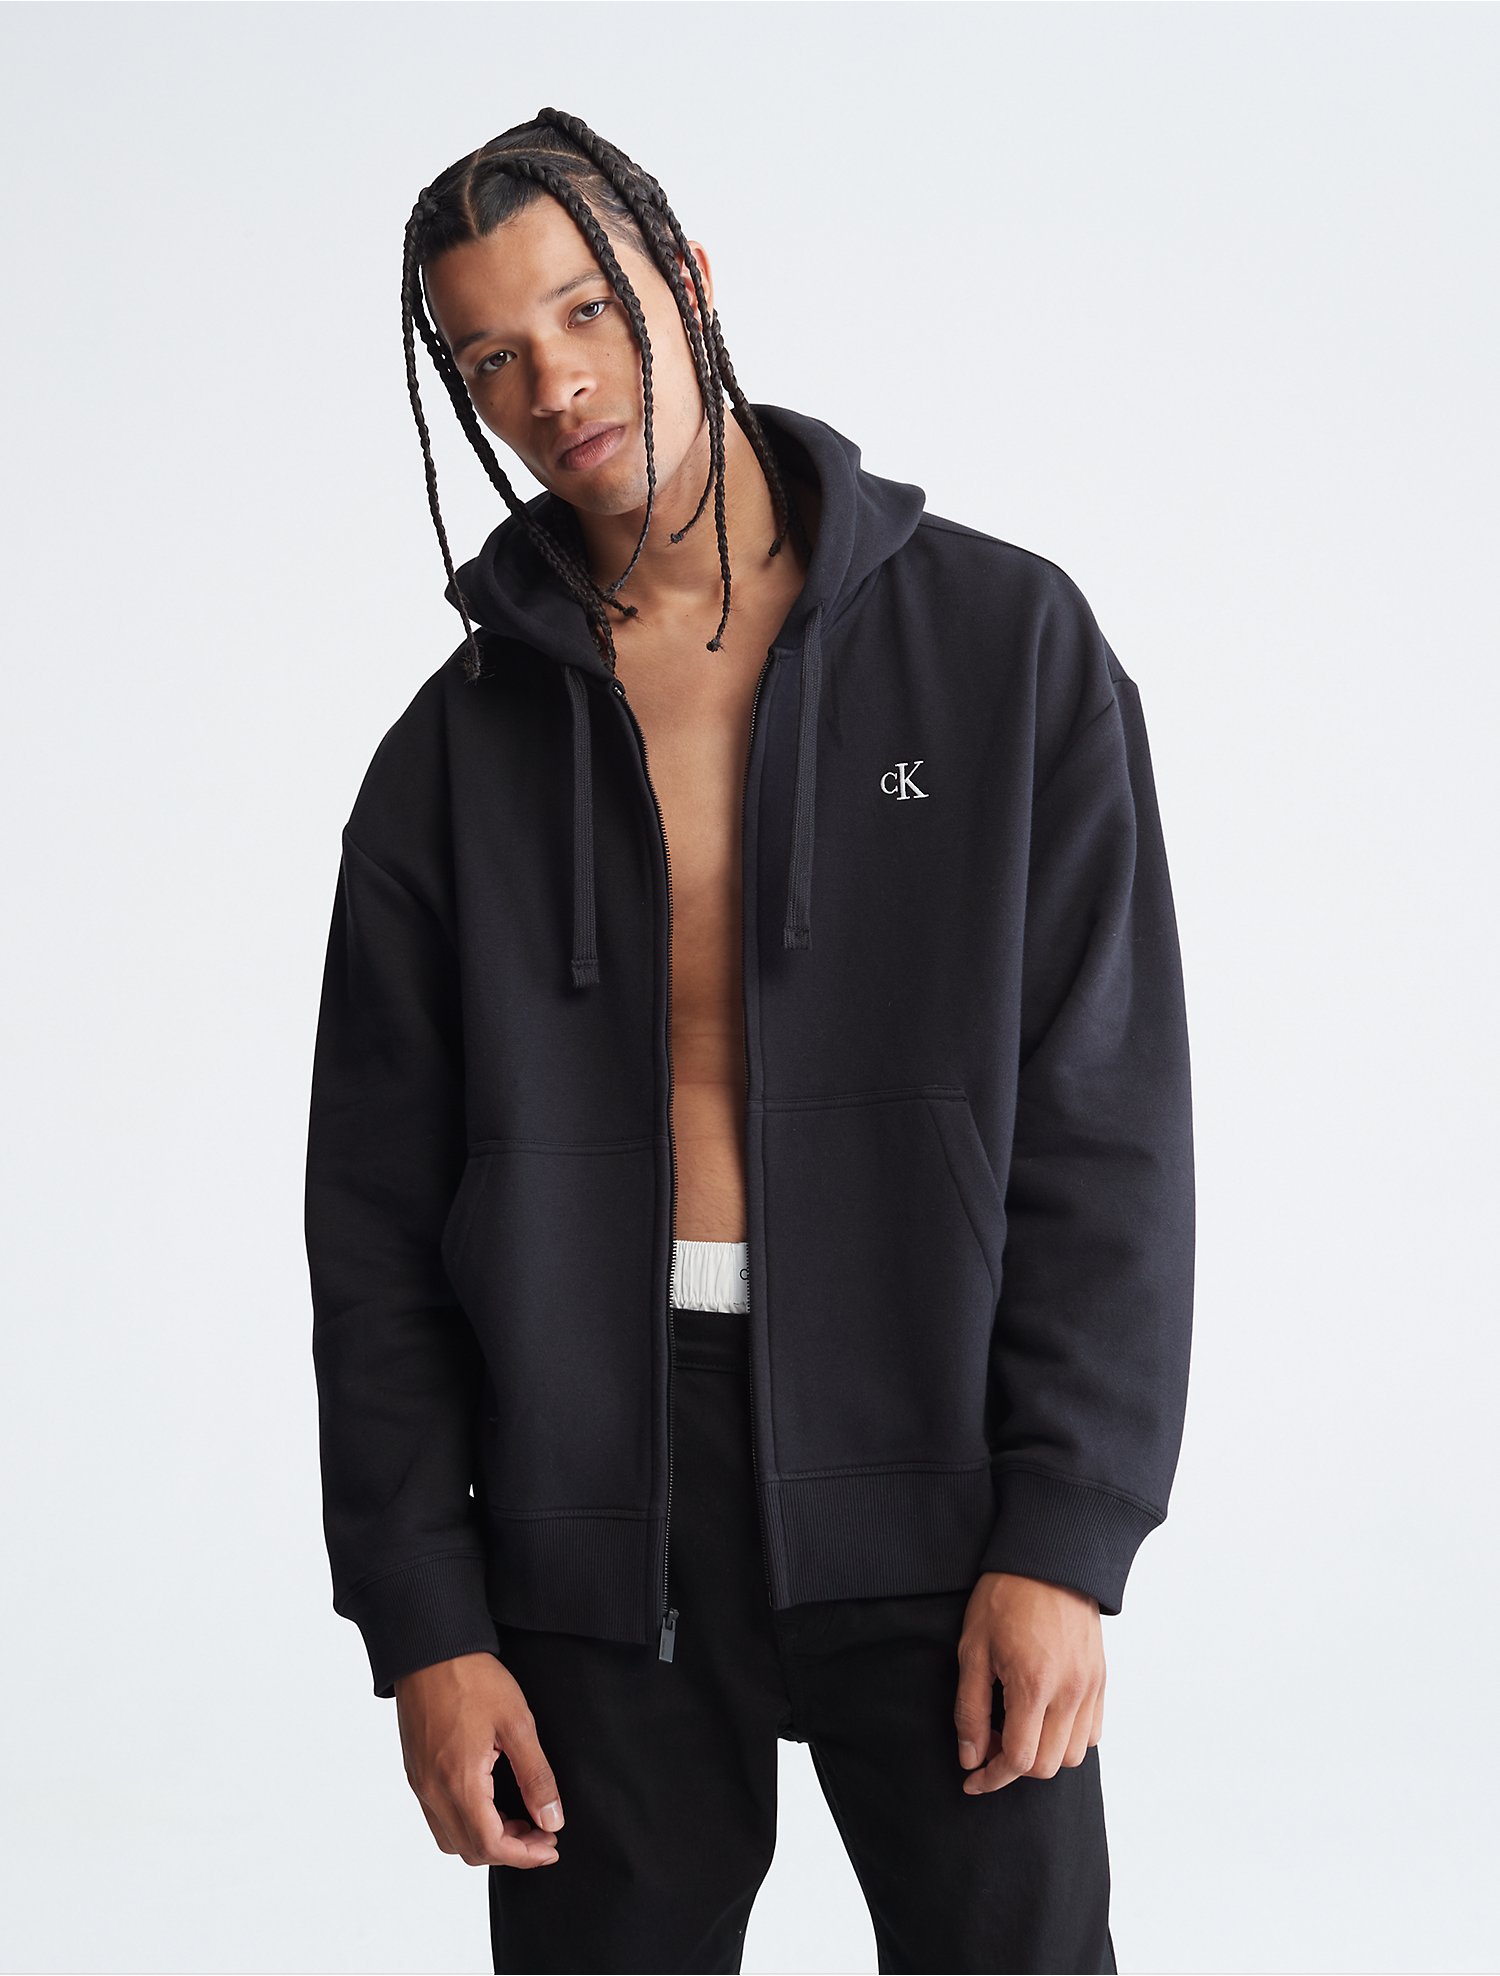 Diplomati score Anklage Relaxed Fit Archive Logo Fleece Full Zip Hoodie | Calvin Klein